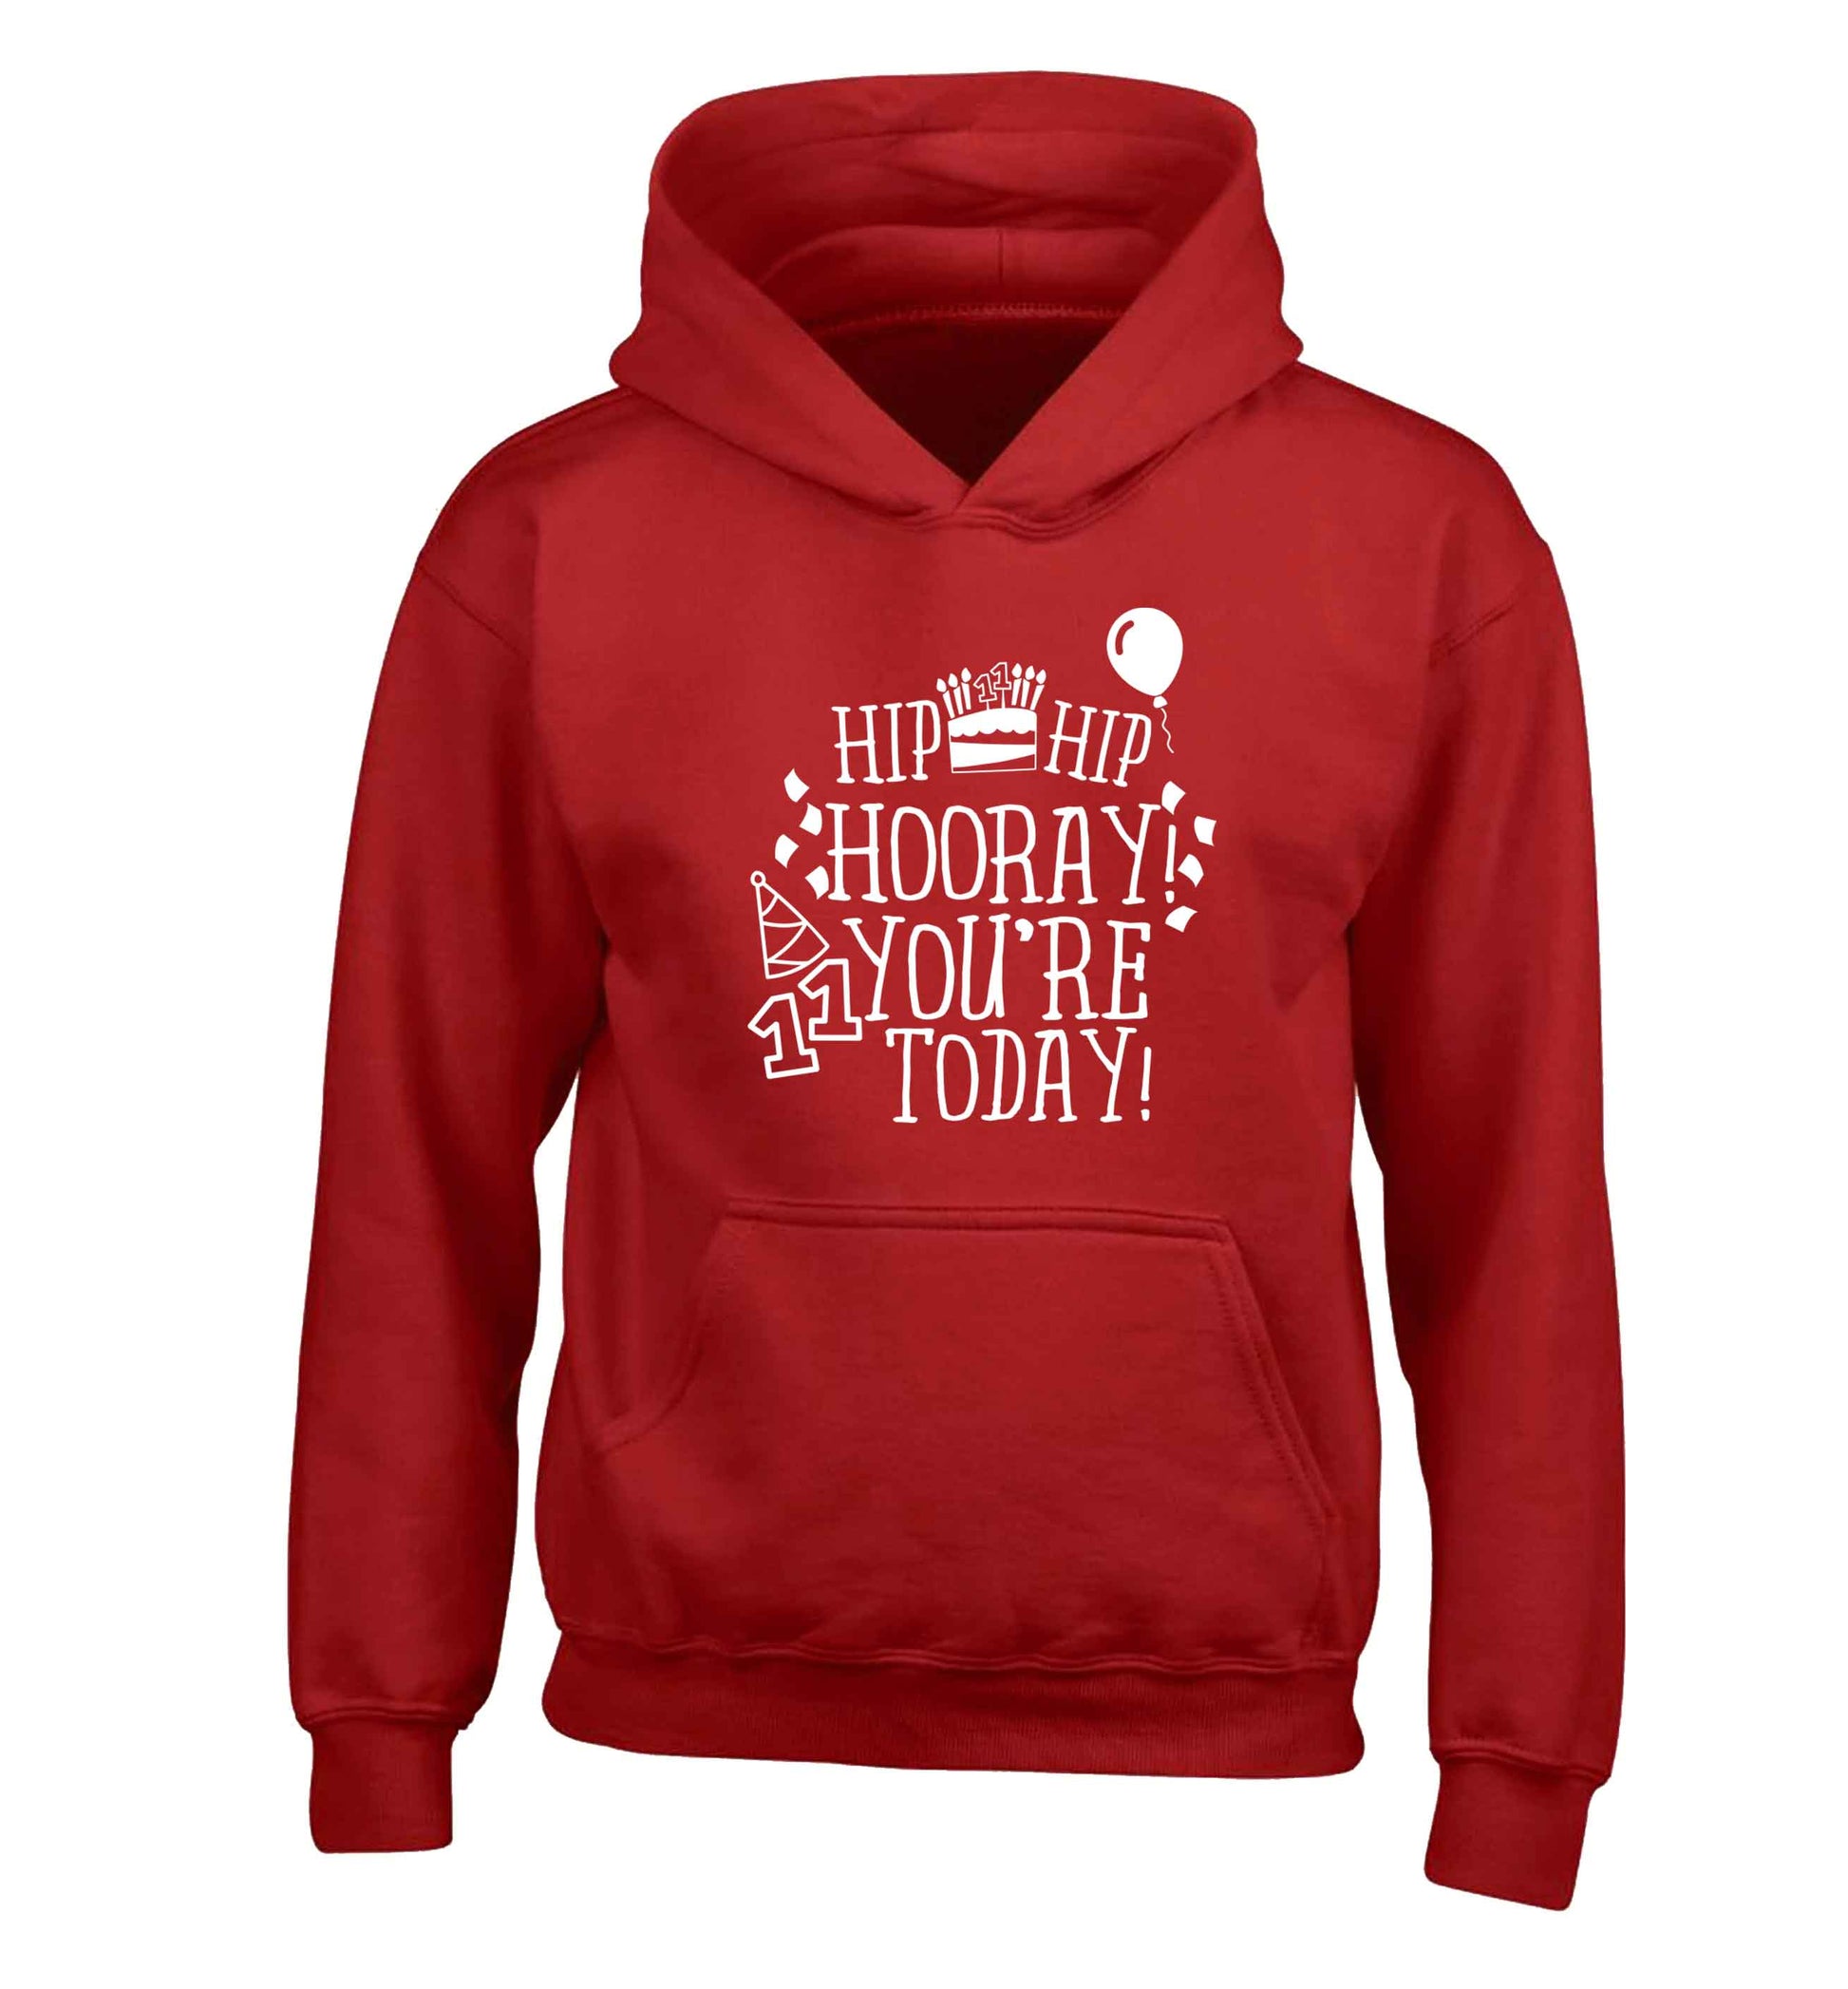 Hip hip hooray I you're eleven today! children's red hoodie 12-13 Years